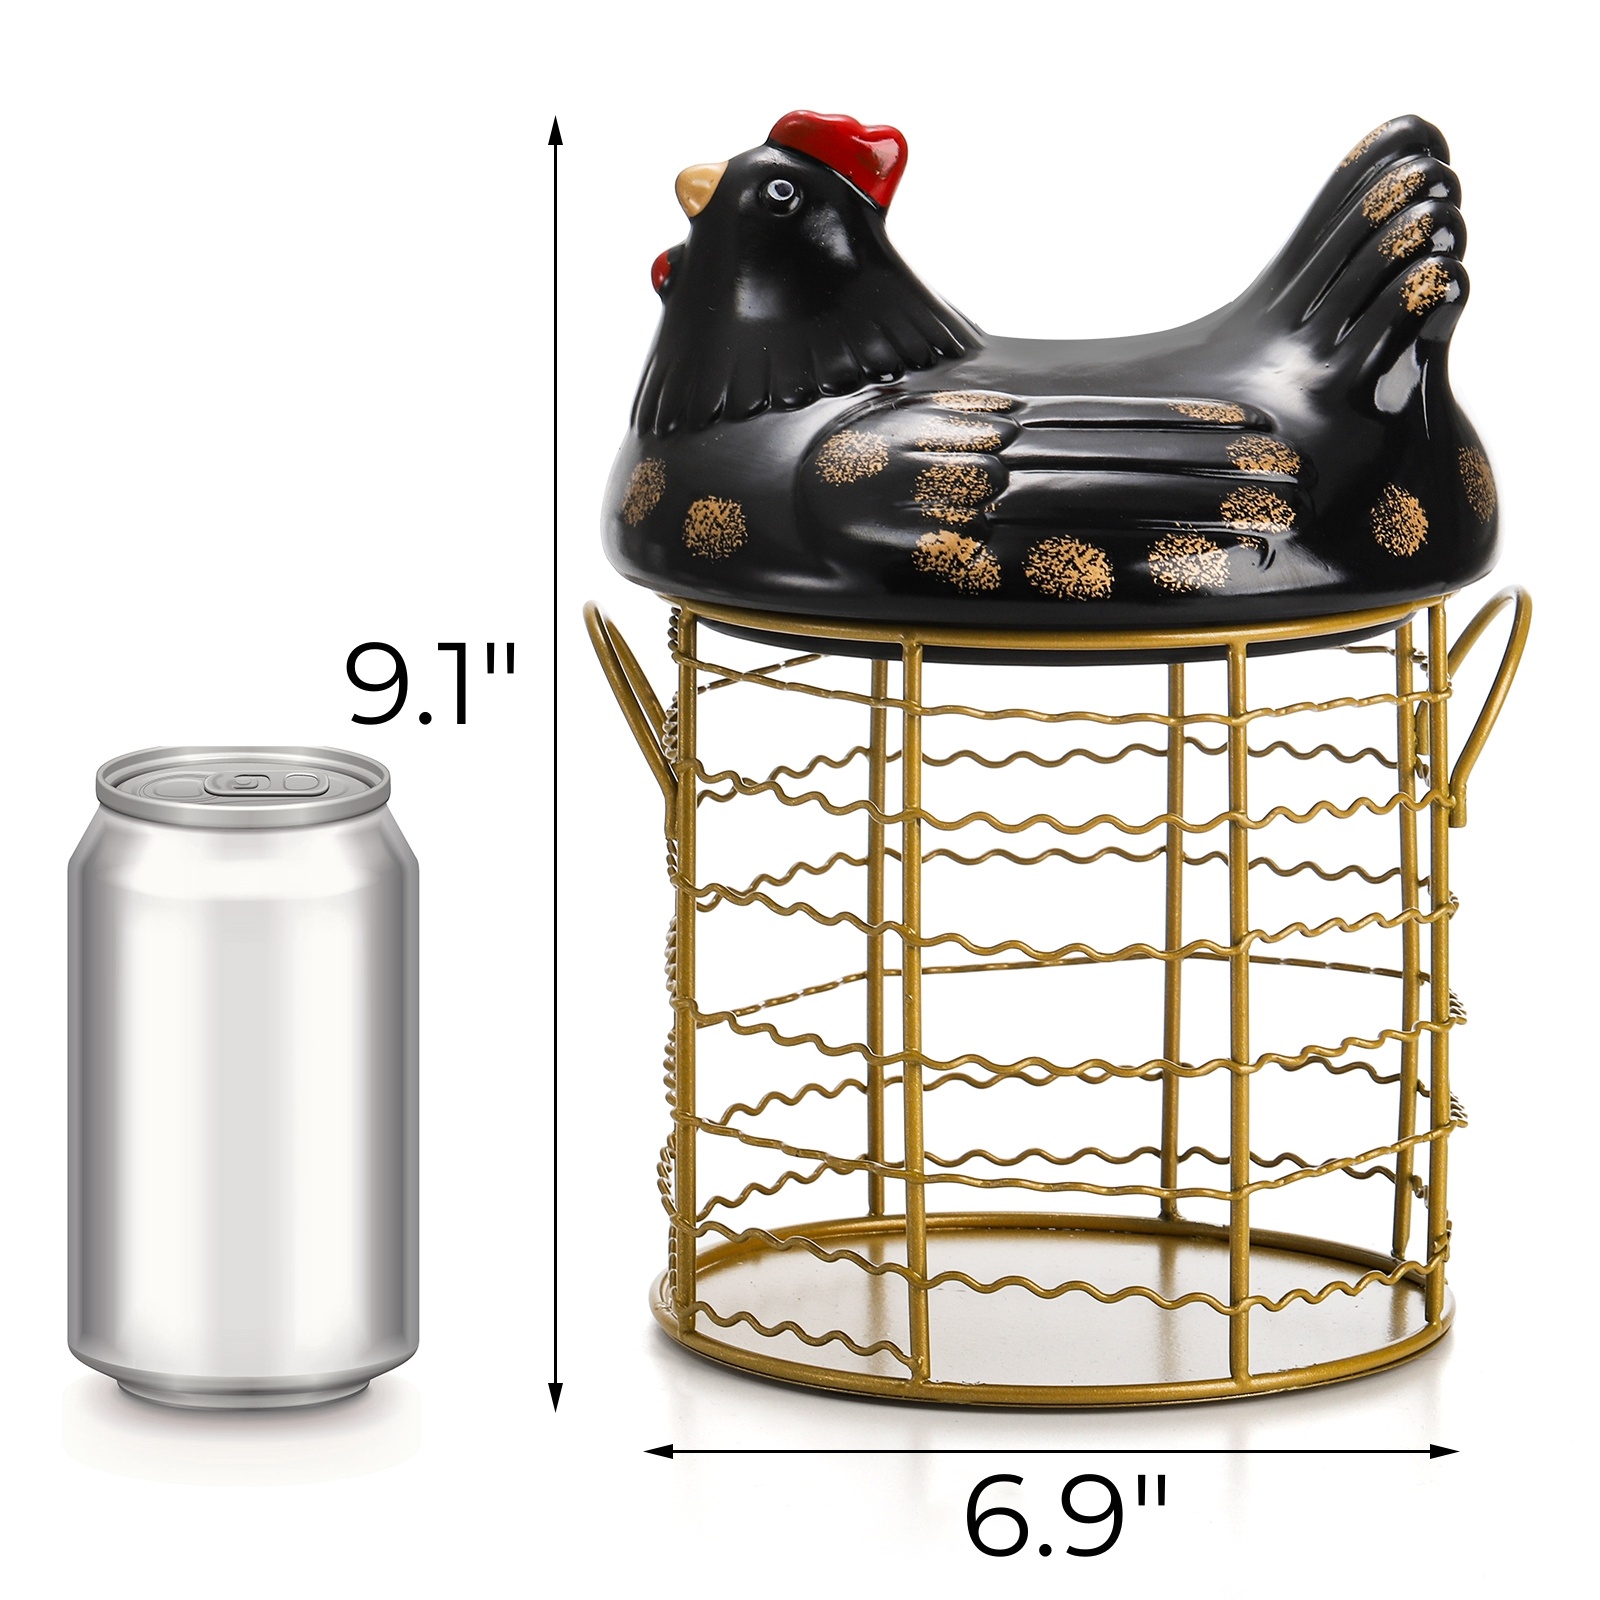 Gold Wire Egg Basket with Ceramic Chicken Design Lid, Metal Egg Basket for Fresh Eggs with Handles, Portable Black Fresh Egg Collecting Basket Holder for Countertop, Holds about 25 Eggs